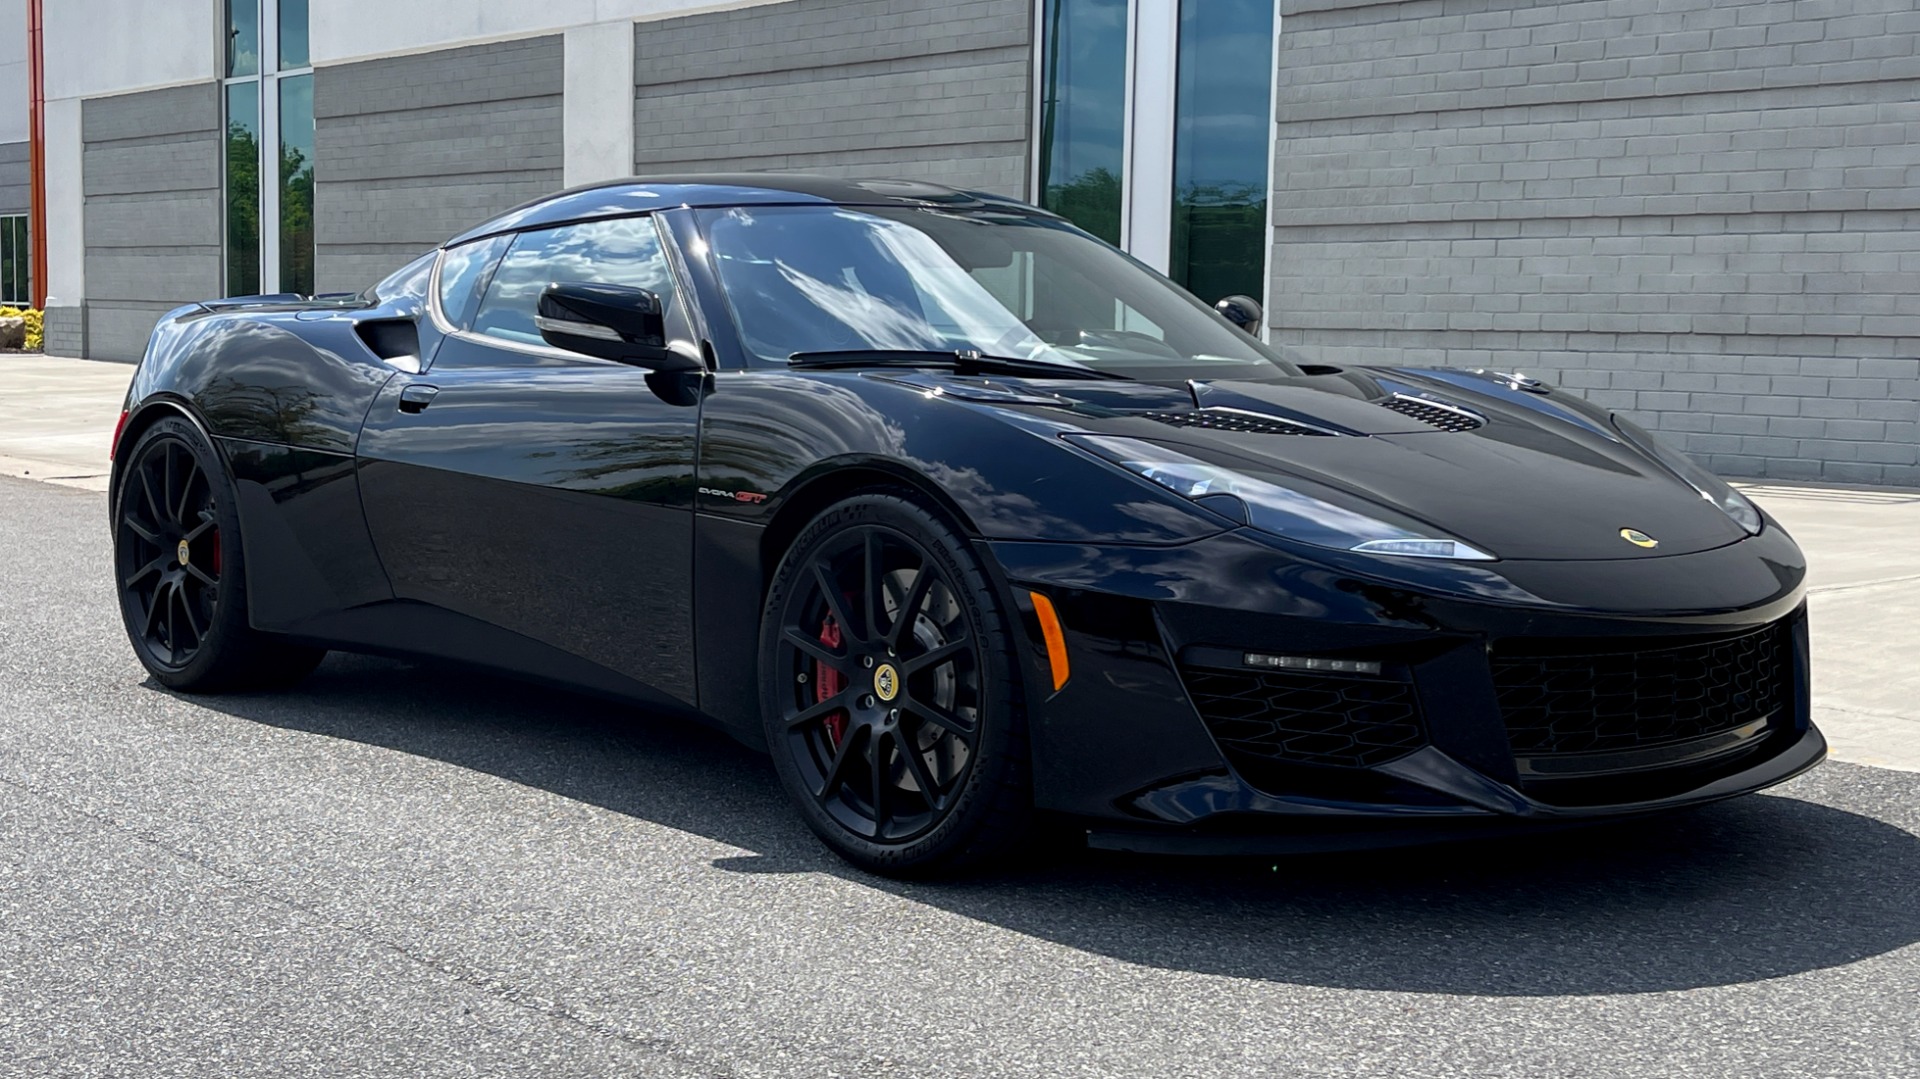 Used 2020 Lotus EVORA GT COUPE / 3.5L SC / NAV / ALPINE SND W/SUBWOOFER / REARVIEW for sale $102,895 at Formula Imports in Charlotte NC 28227 8